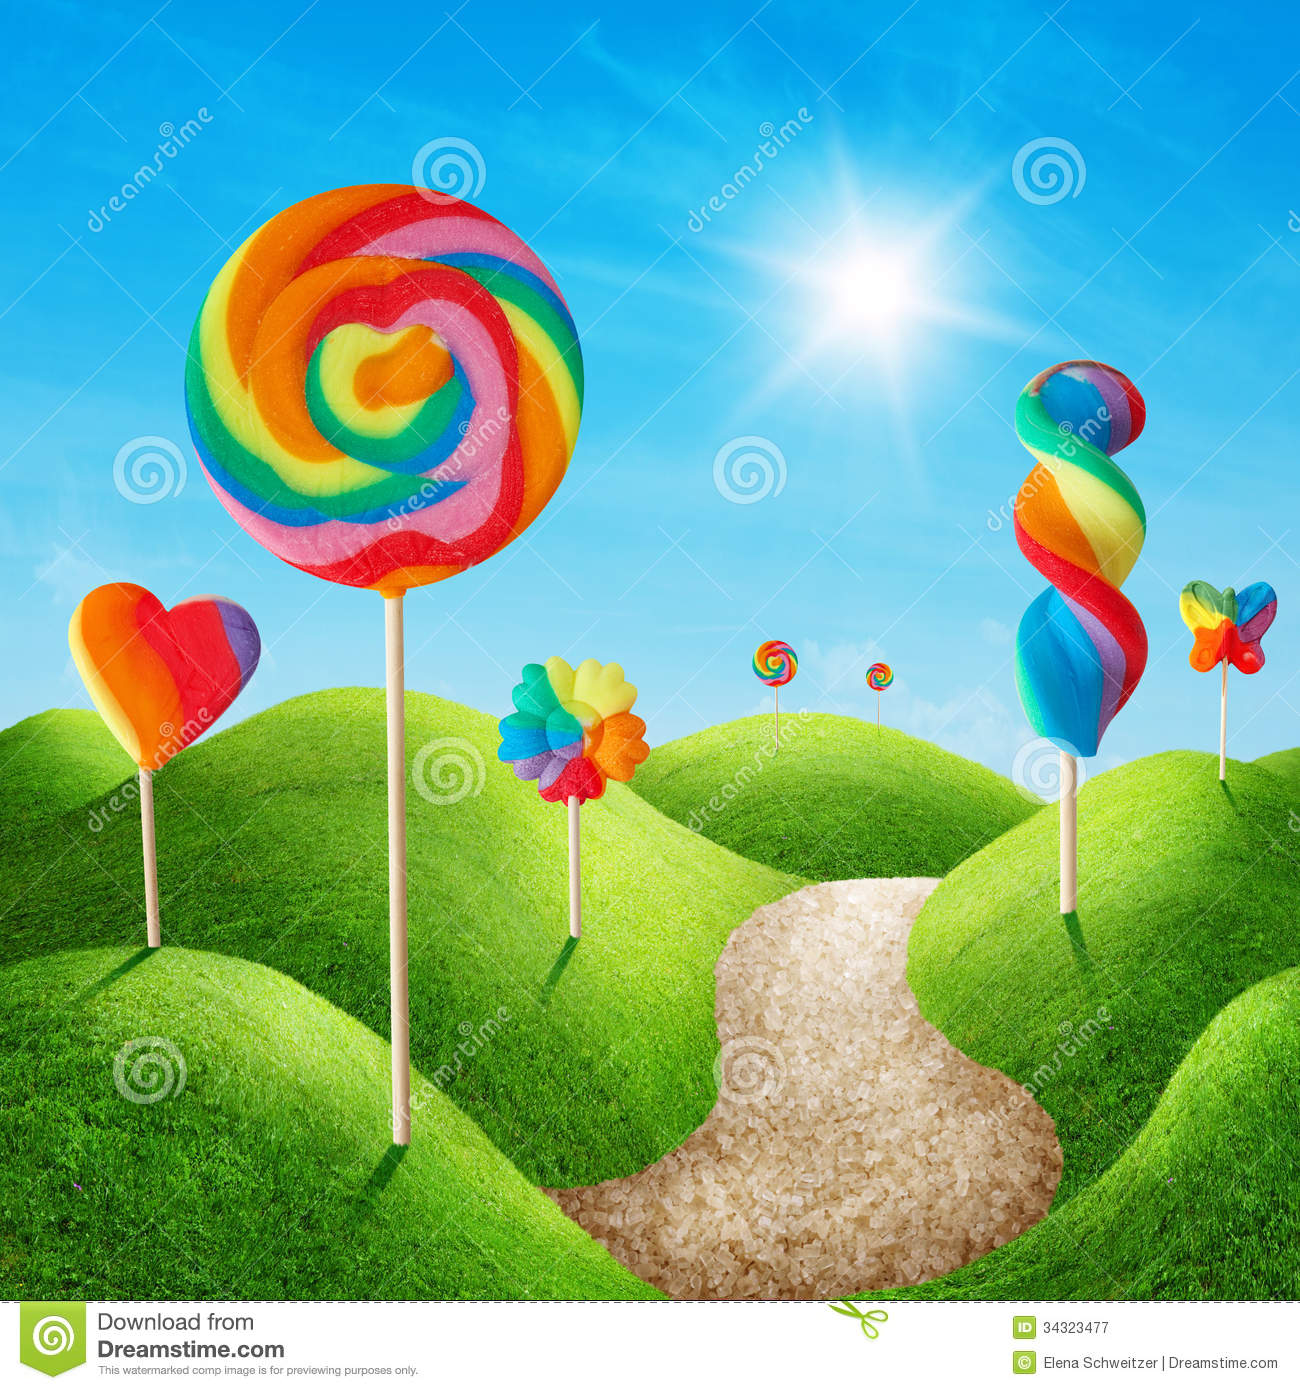 Candy Land Royalty Free Stock Photography   Image  34323477